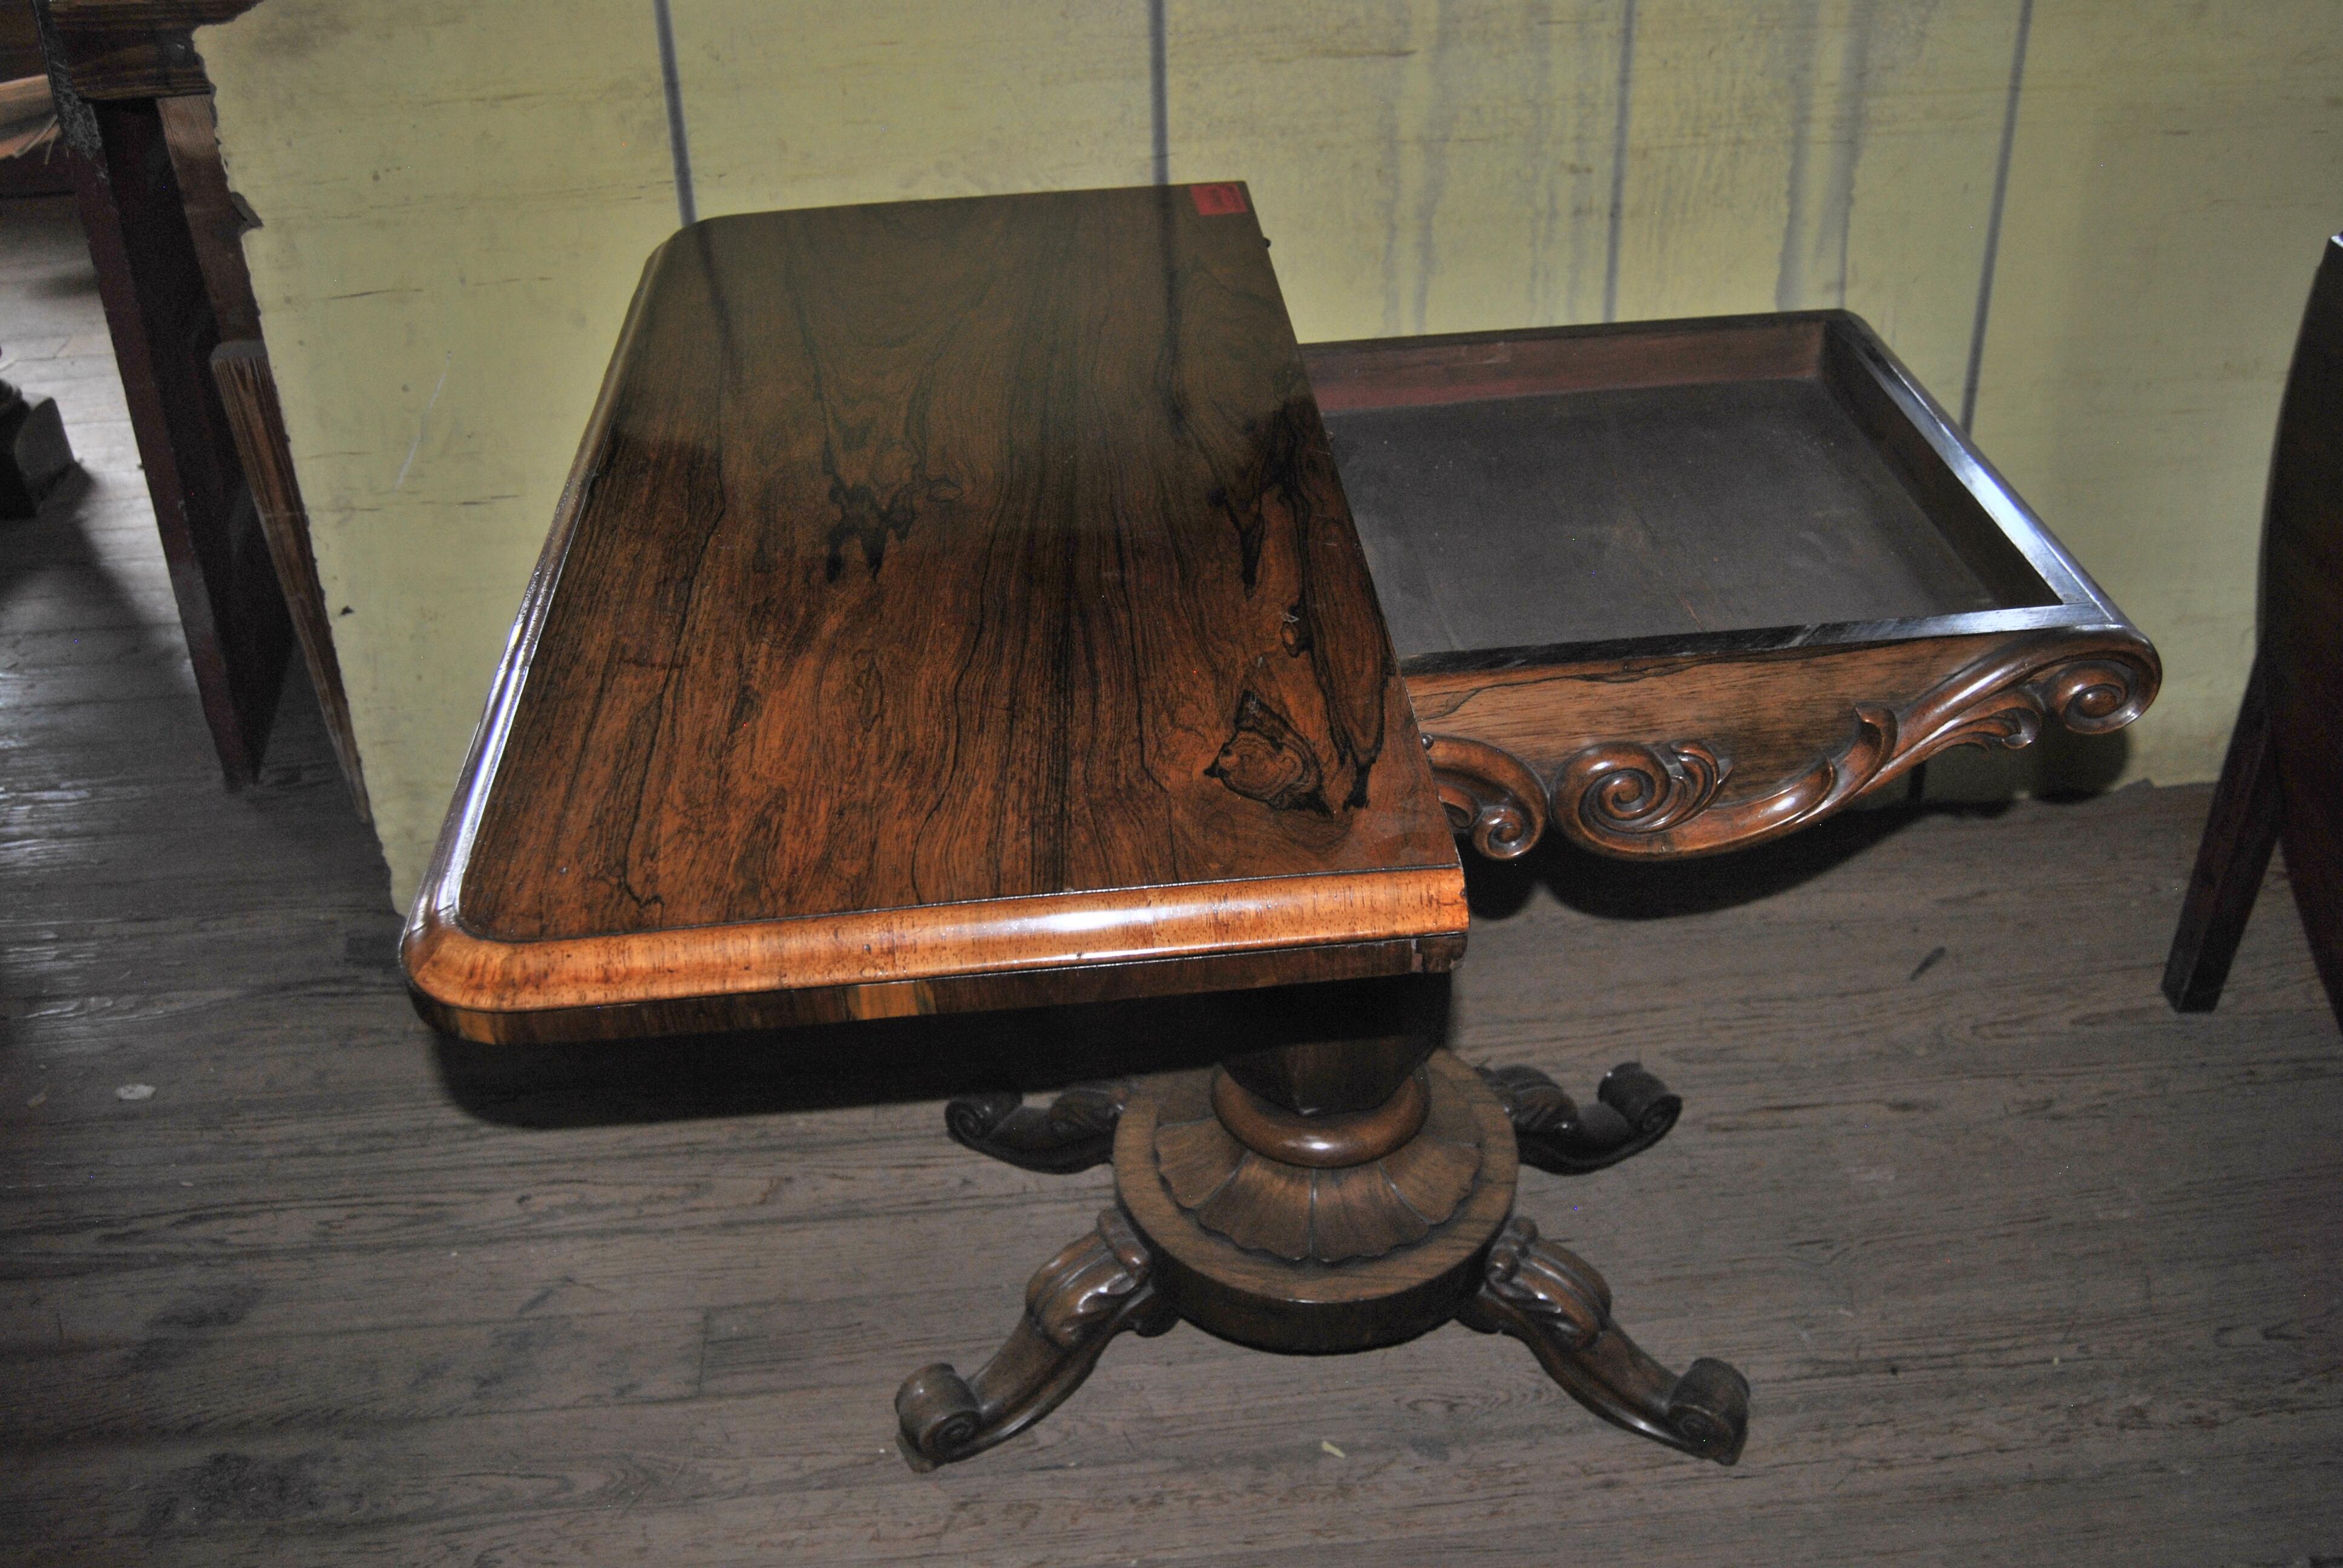 This is a rosewood game, card table made in England, circa 1850. The top has rounded corners and a nicely molded edge. The top spins open to reveal storage for game pieces, cards, etc. The top then folds over to give a playing surface covered in a